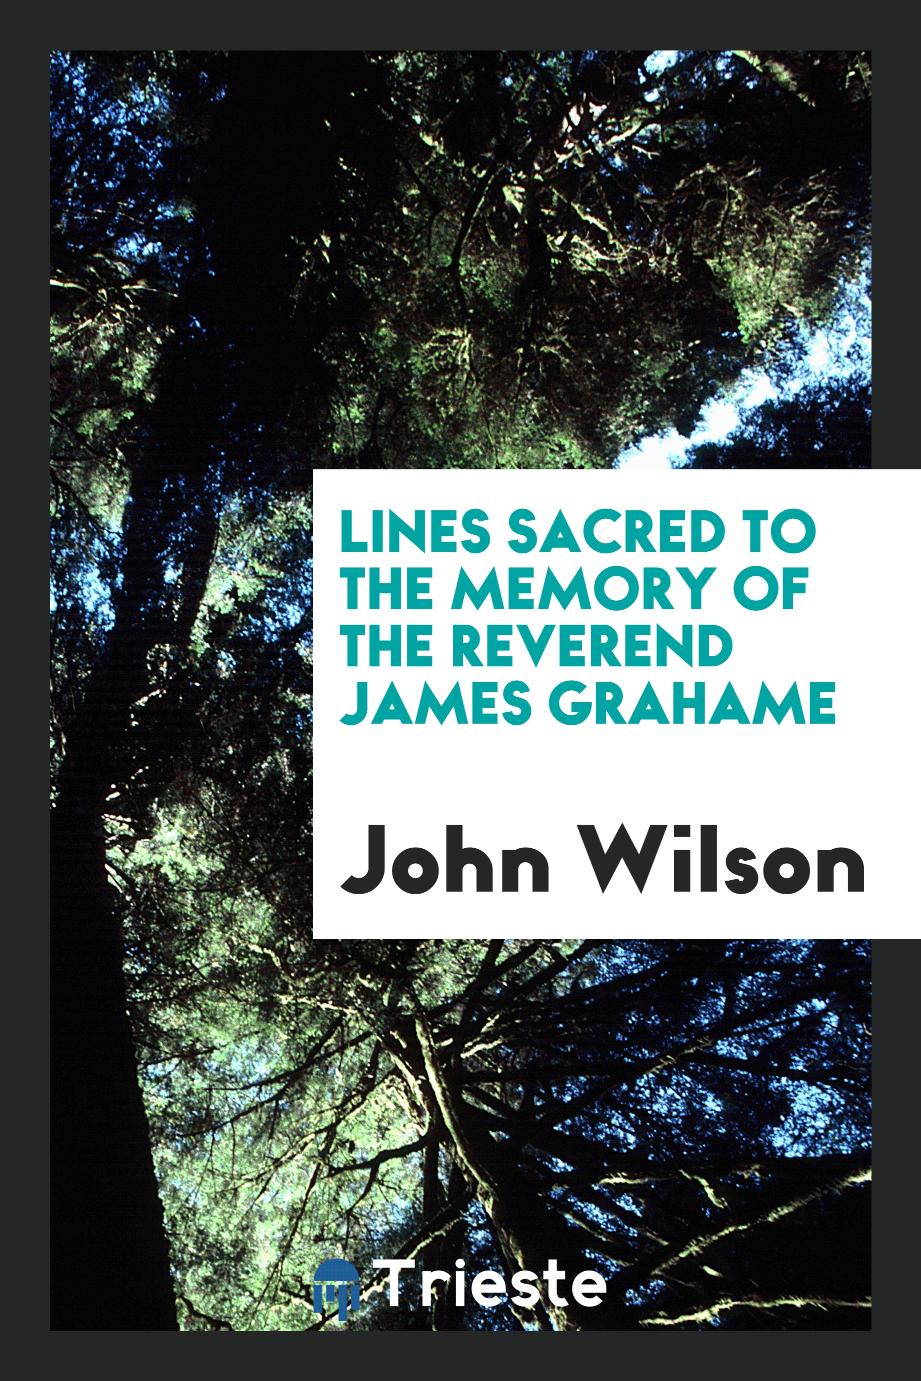 Lines sacred to the memory of the reverend James Grahame